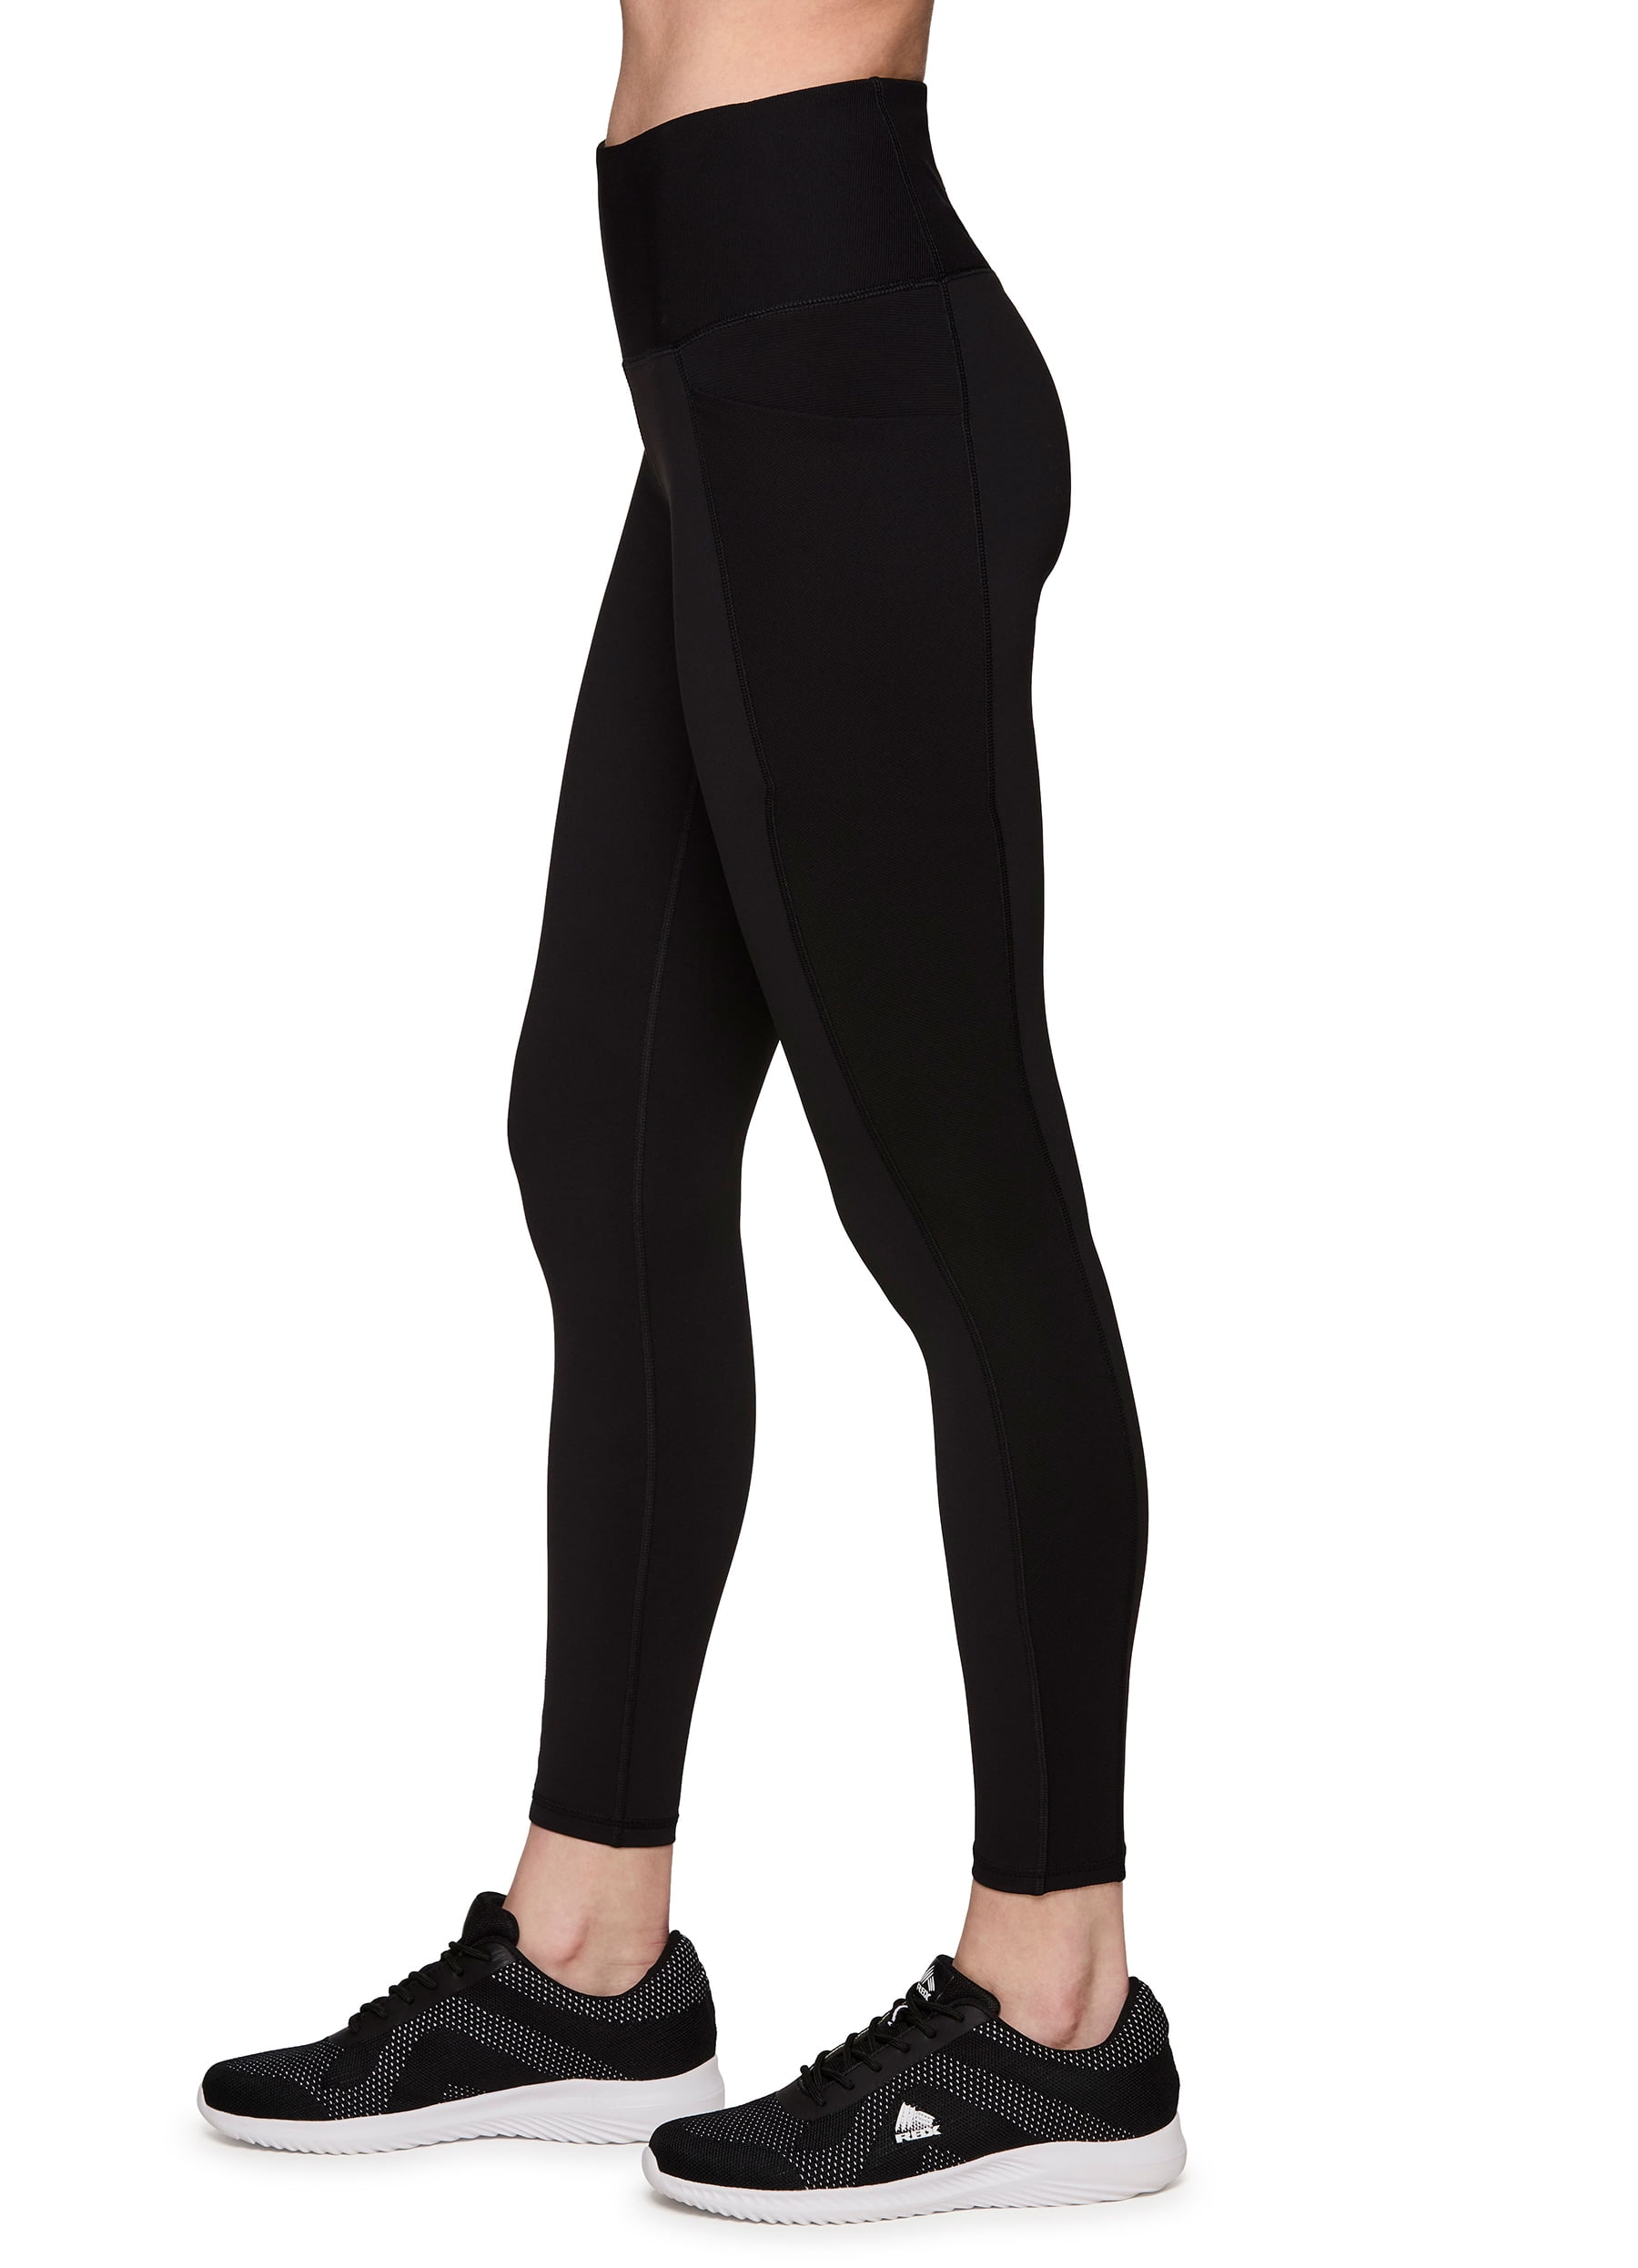 RBX Active Women's Micro Rib Side Squat Proof Workout Legging With